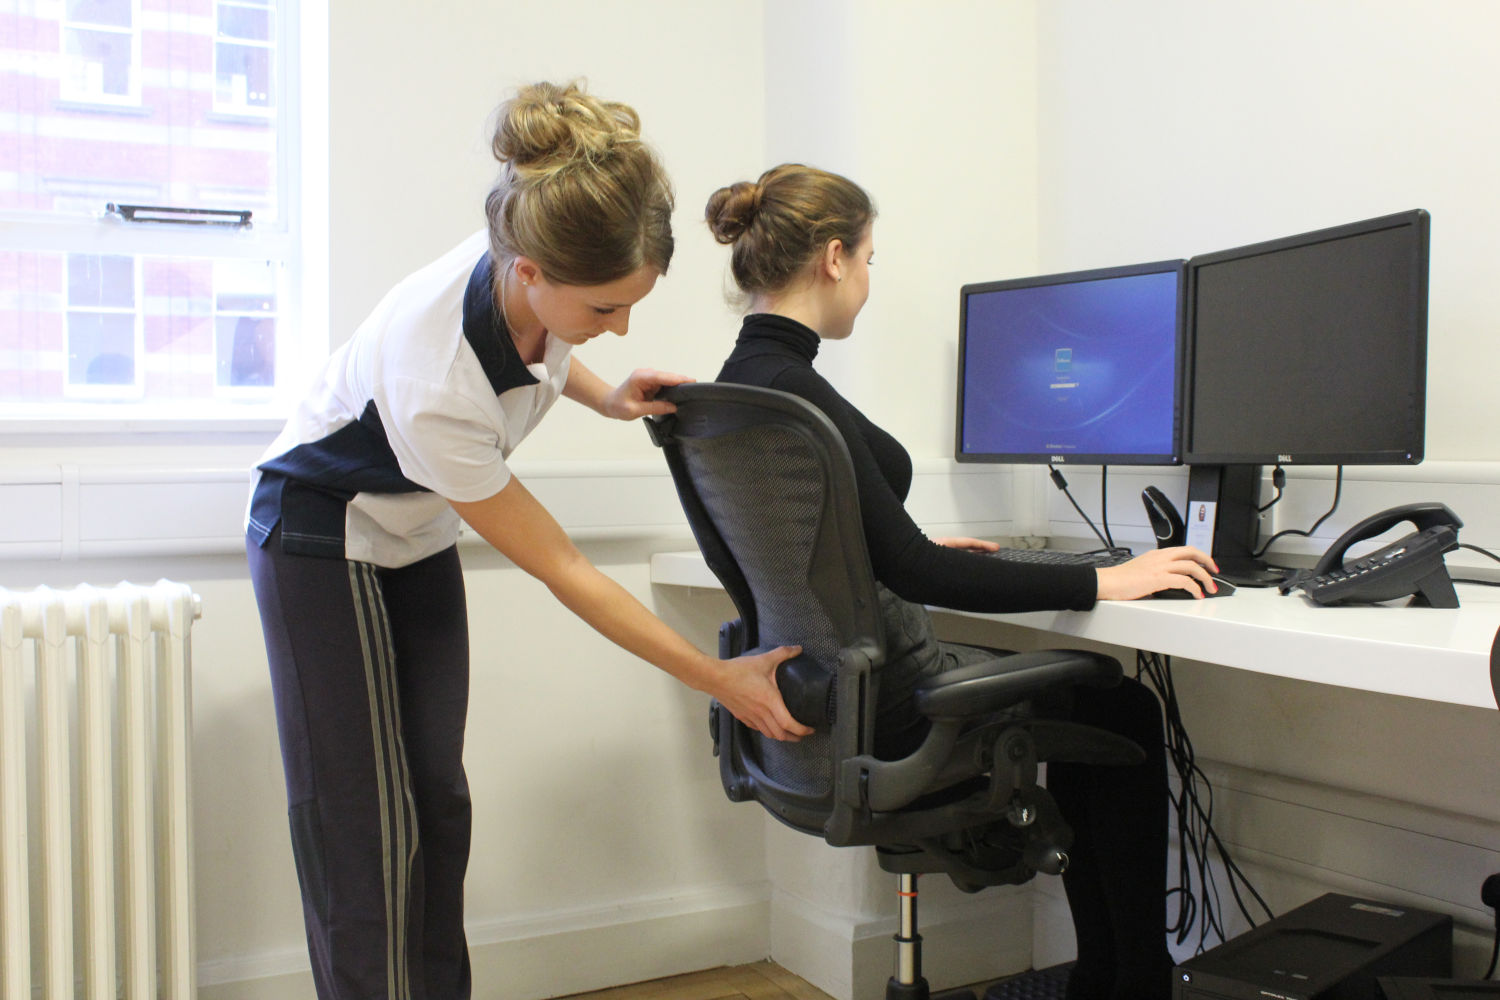 Admin staff member sat with good posture with support from Physio specialist.